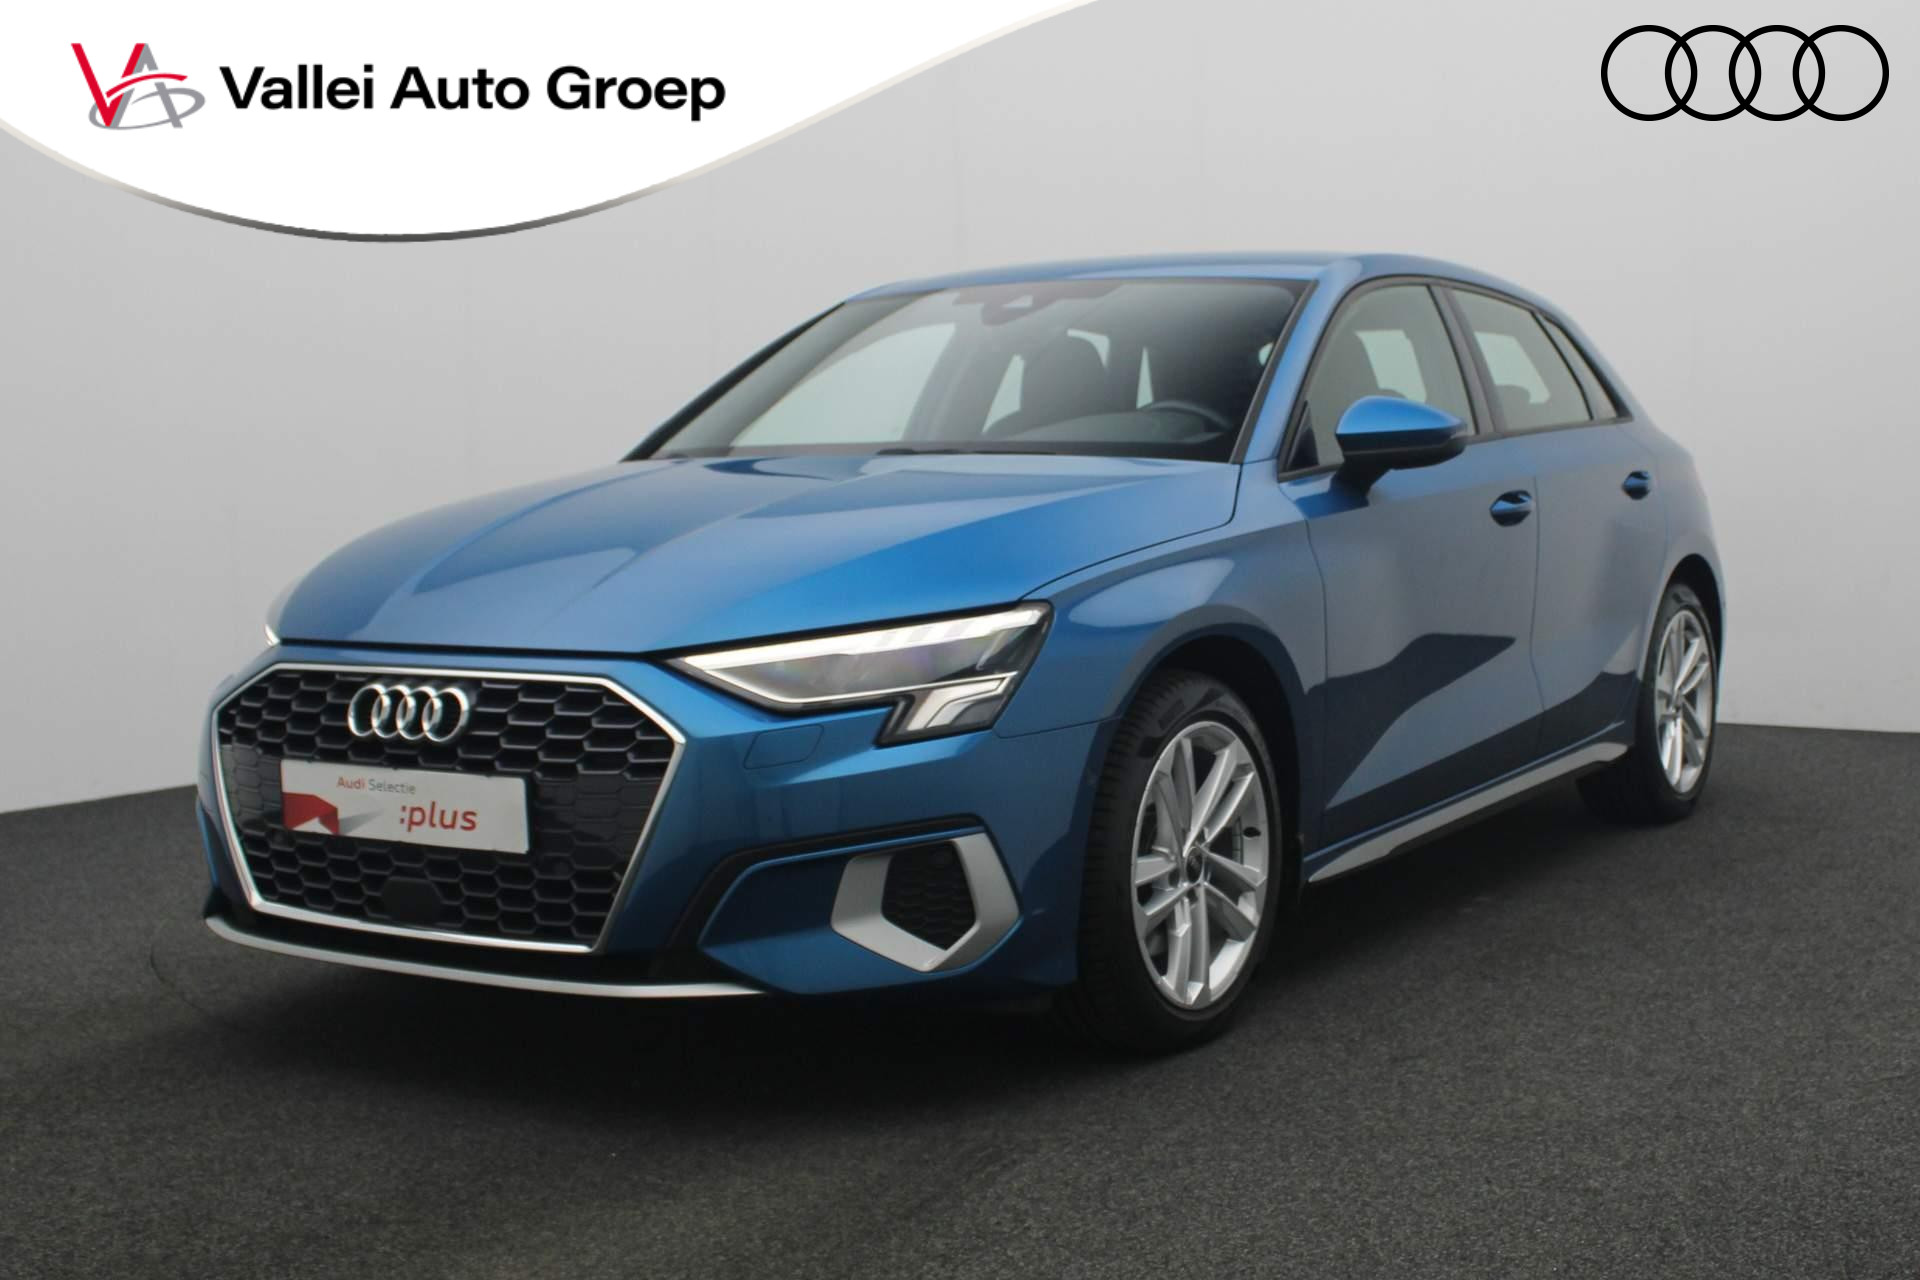 Audi A3 Sportback 35 TFSI 150PK S-tronic Advanced edition | Full LED | Stoelverwarming | ACC | 17 inch | Parkeersensoren voor/achter | Apple Carplay / Android Auto